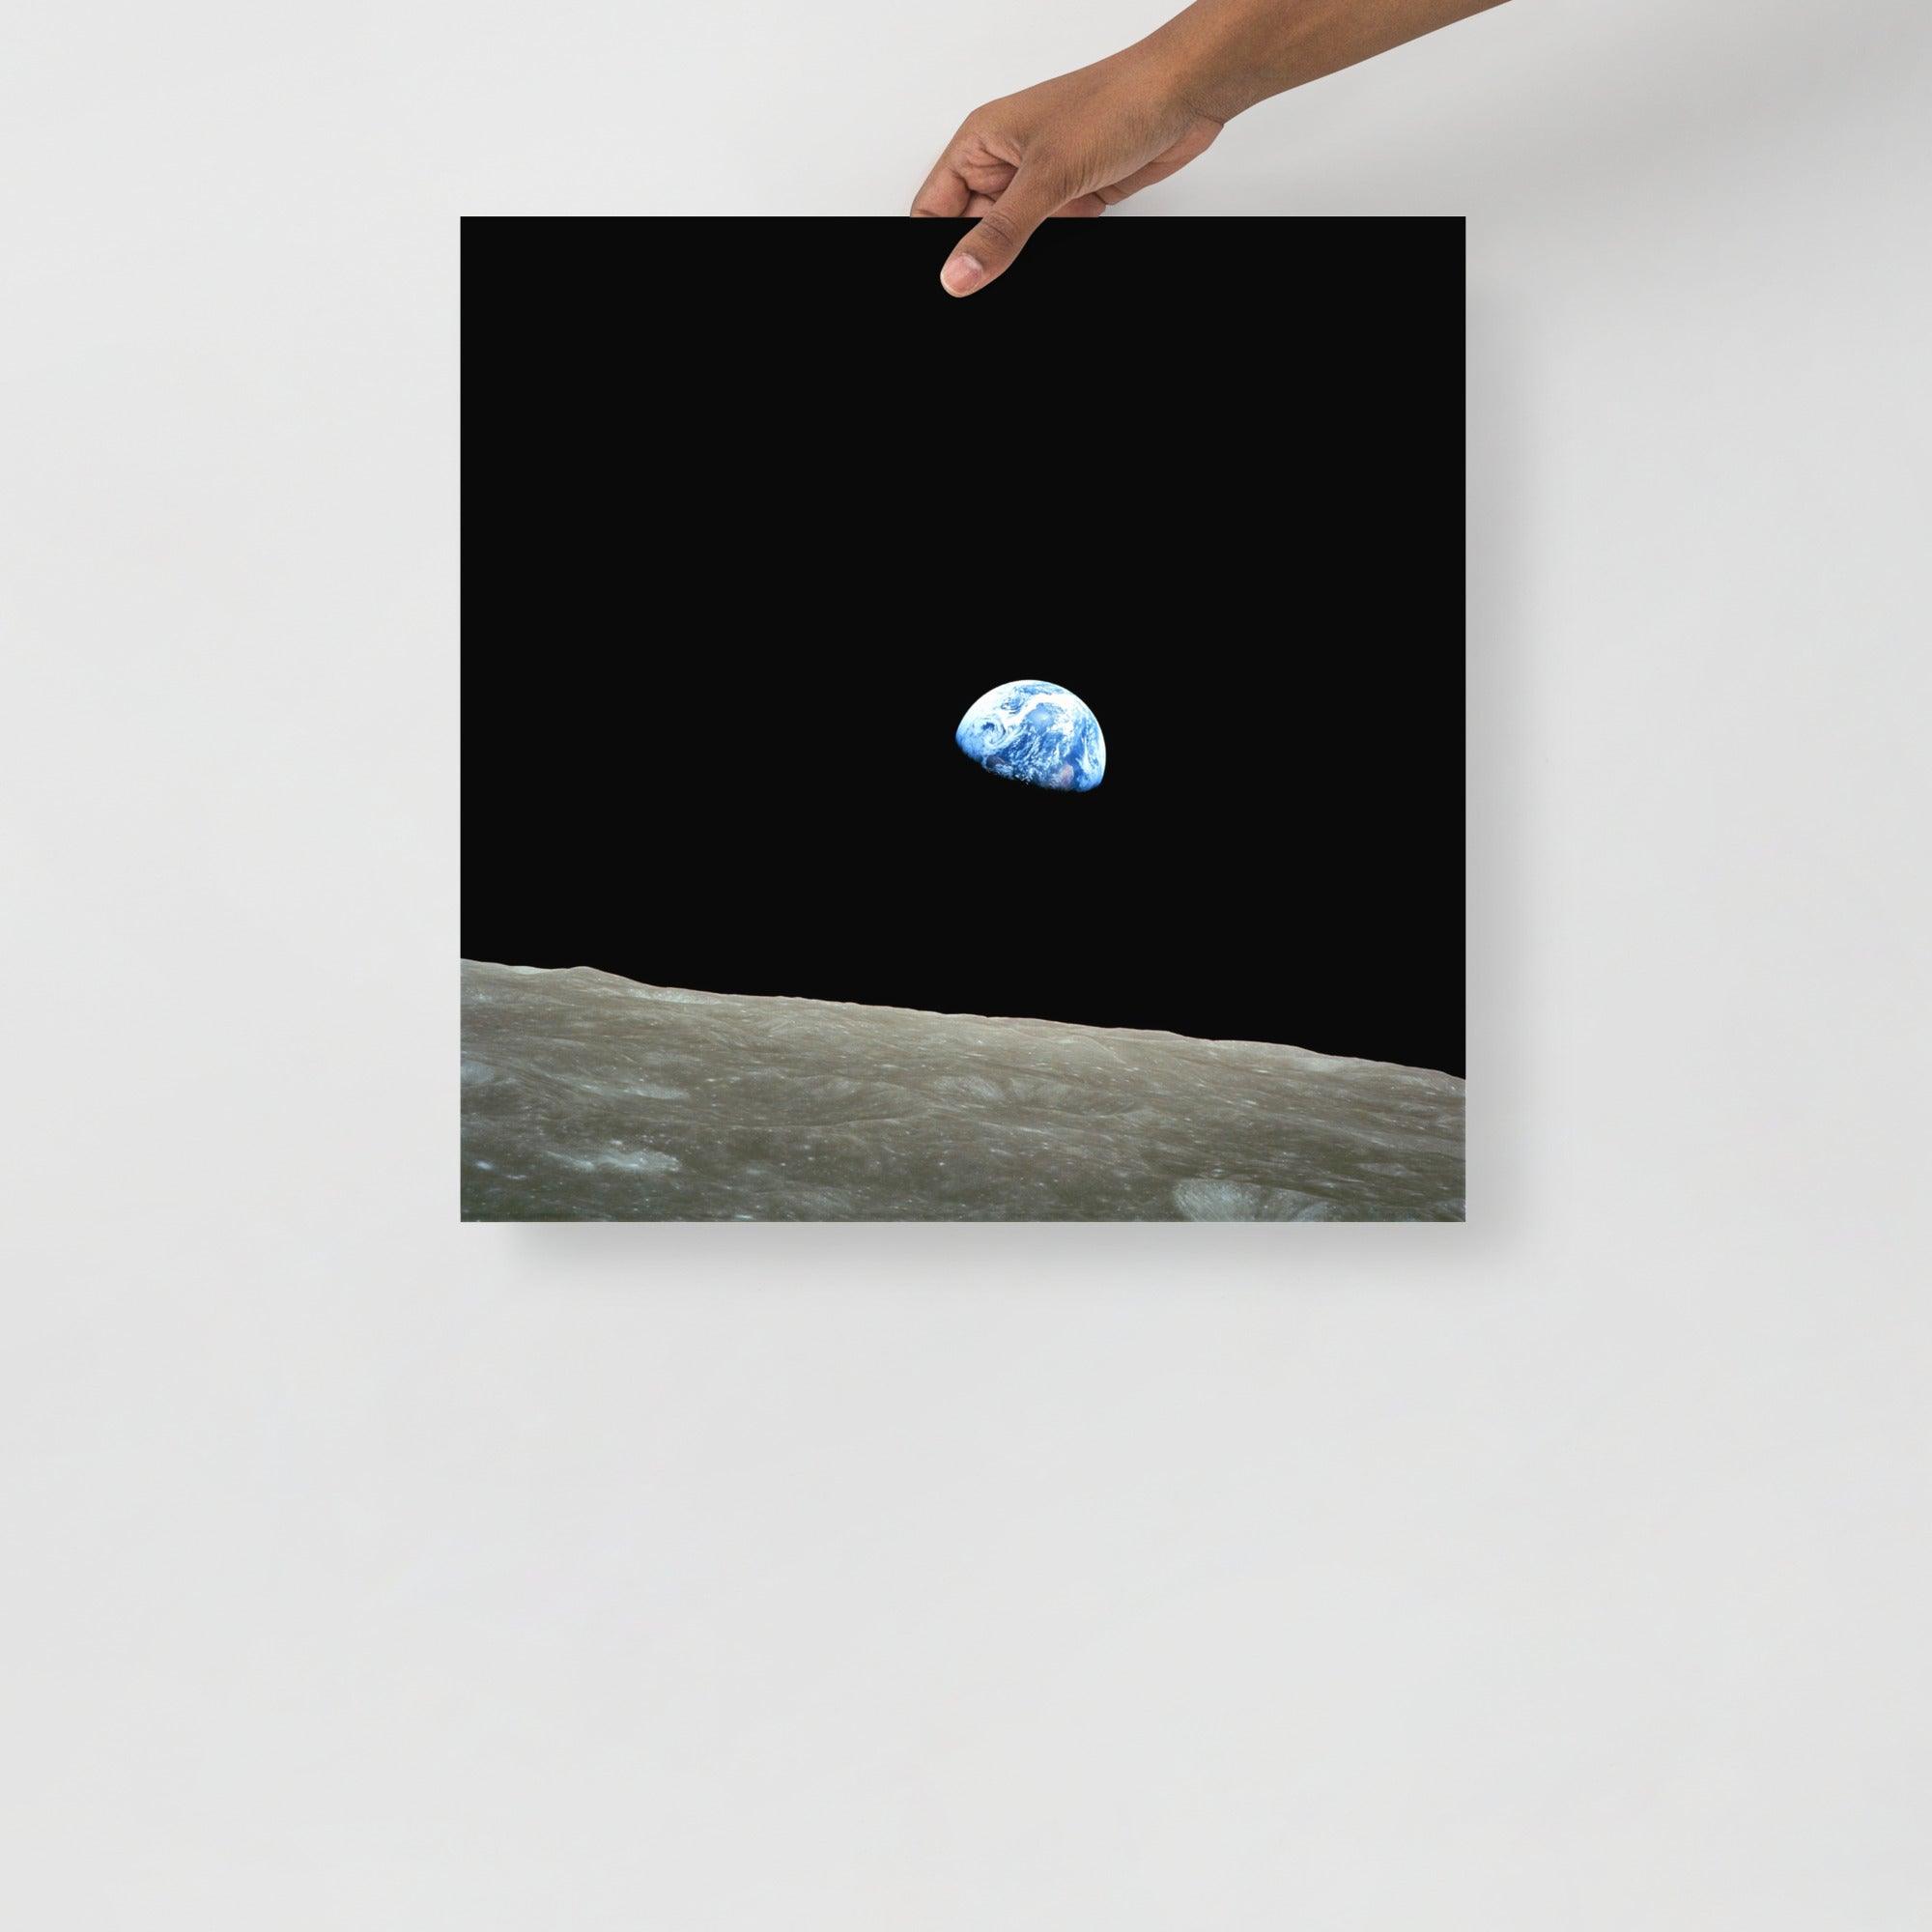 An Earthrise Apollo 8 poster on a plain backdrop in size 18x18”.